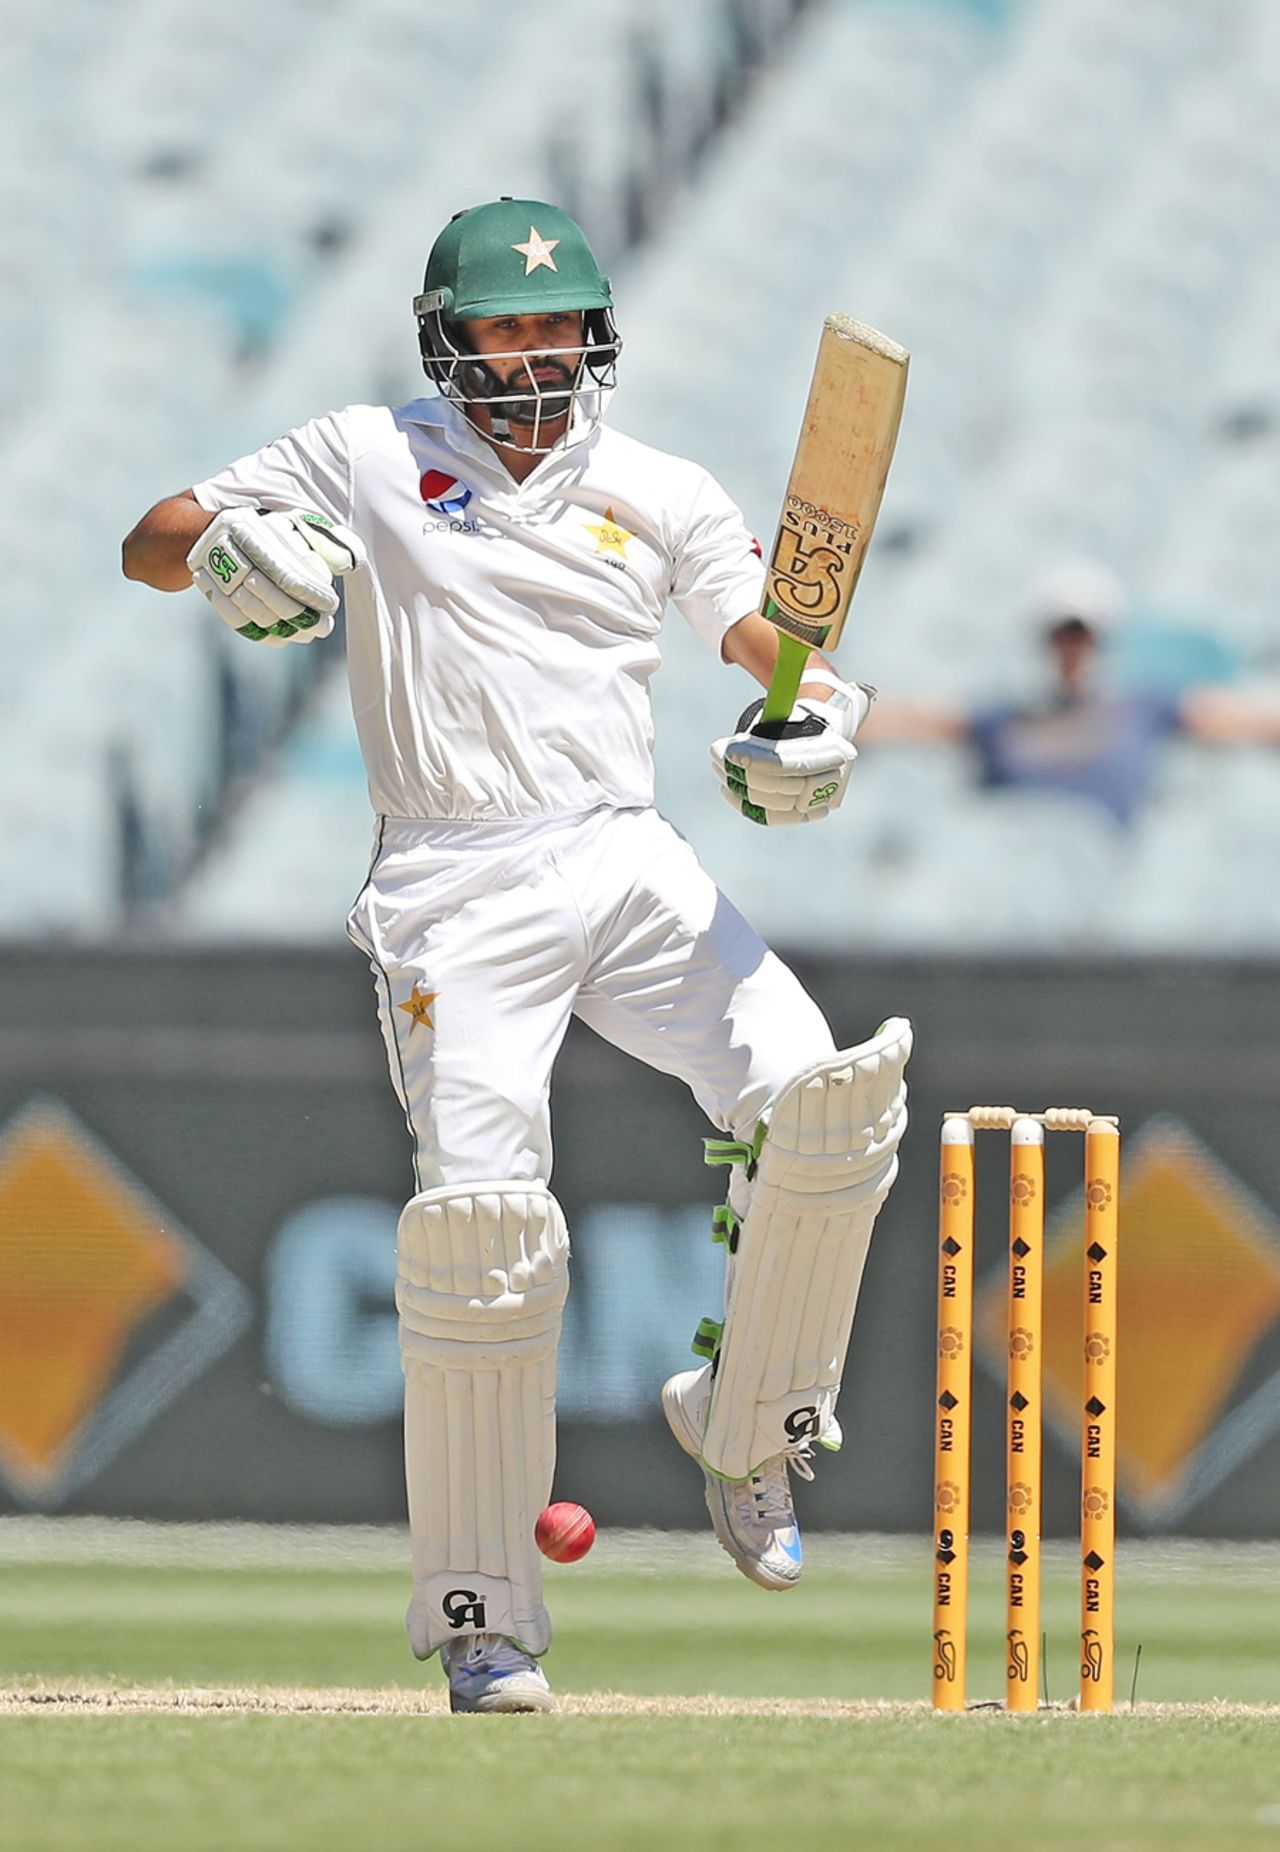 Azhar Ali tries to regain balance after taking a bouncer on his bottom hand, Australia v Pakistan, 2nd Test, 5th day, Melbourne, December 30, 2016